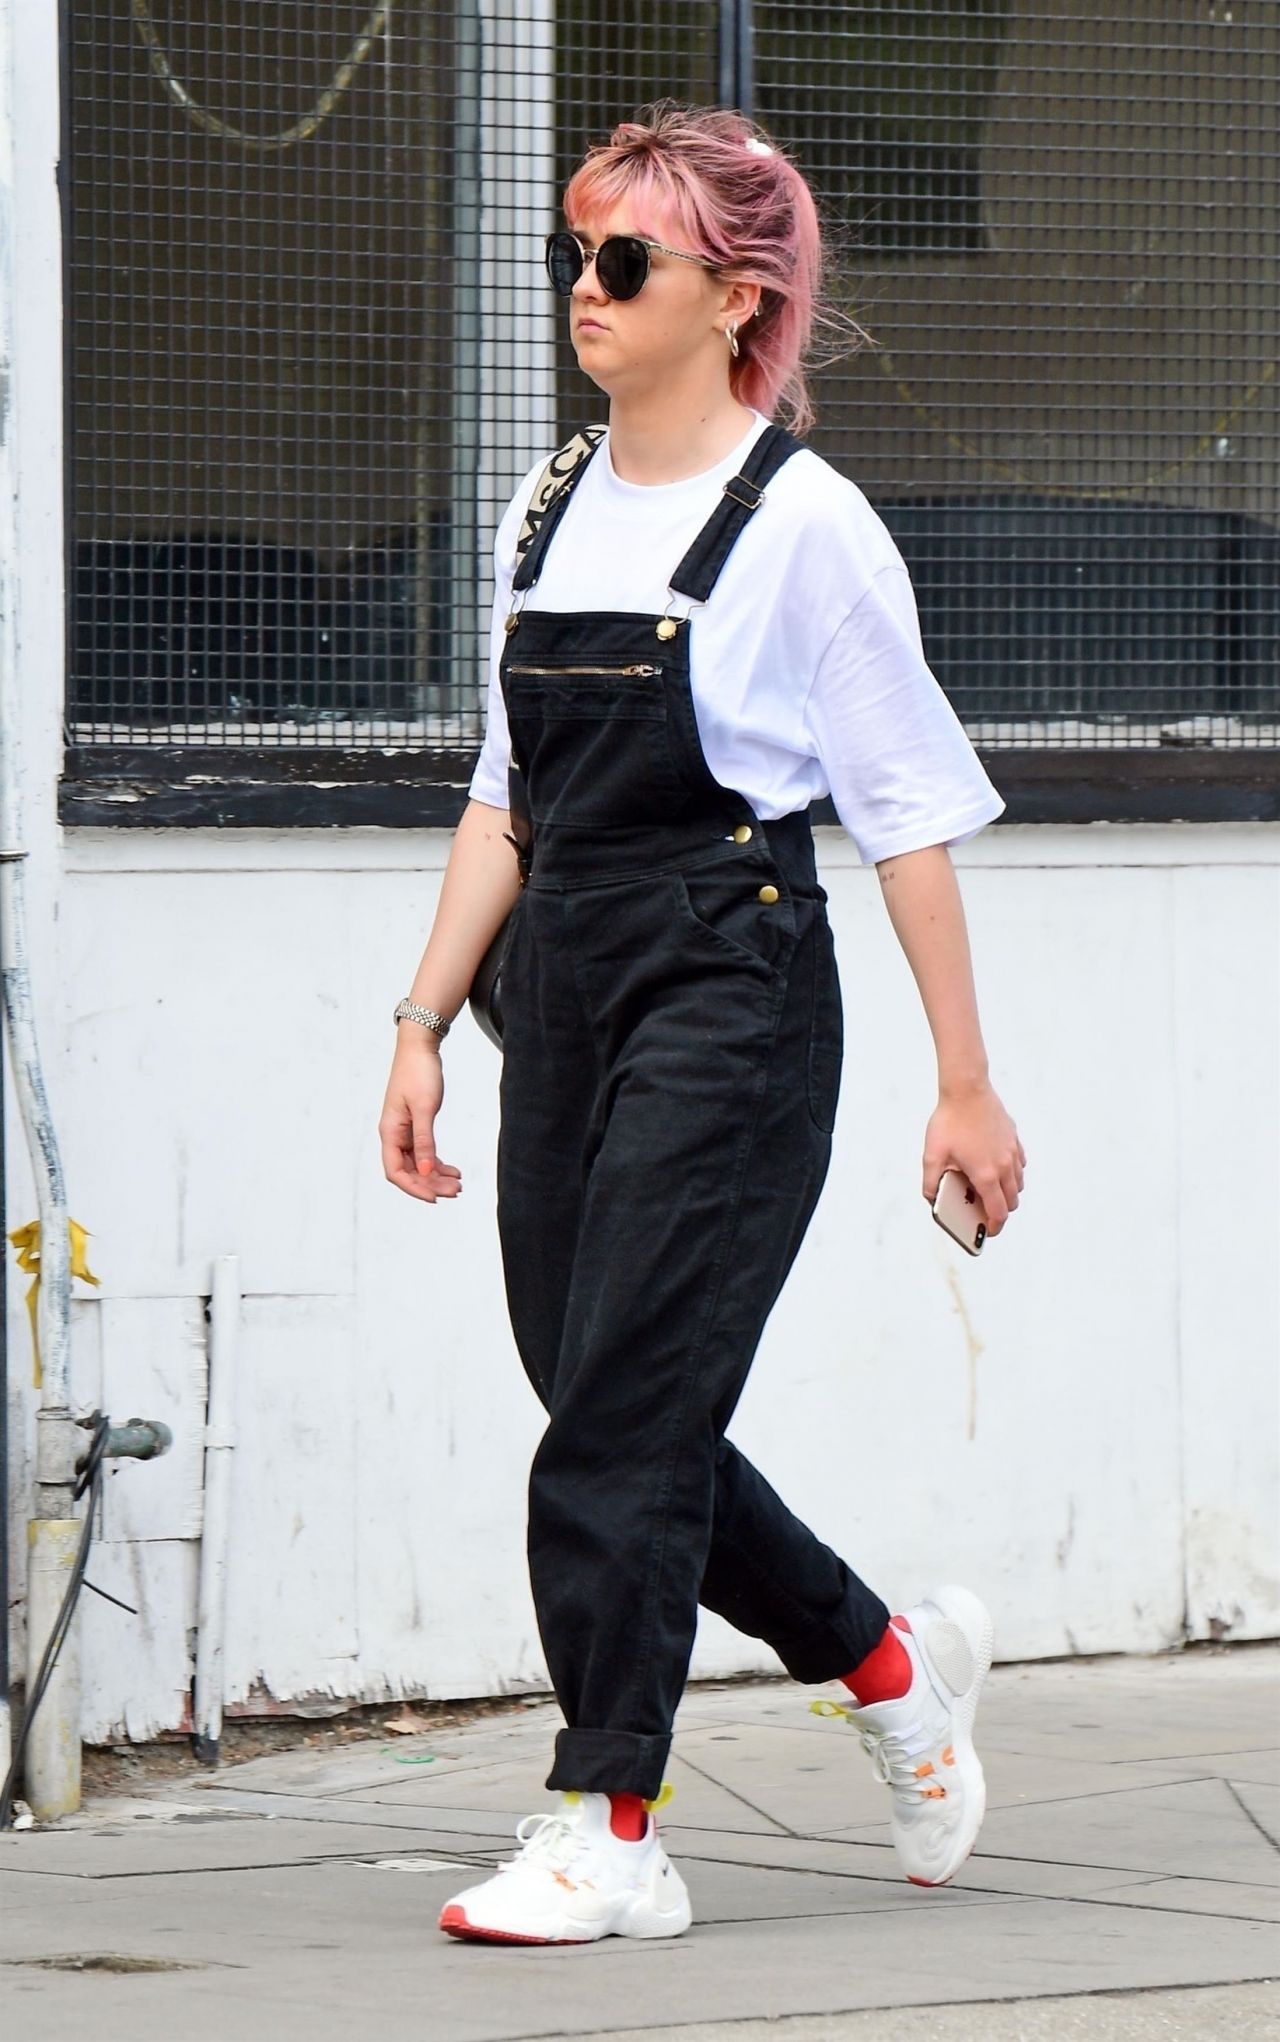 maisie-williams-out-in-london-07-17-2019-2.jpg